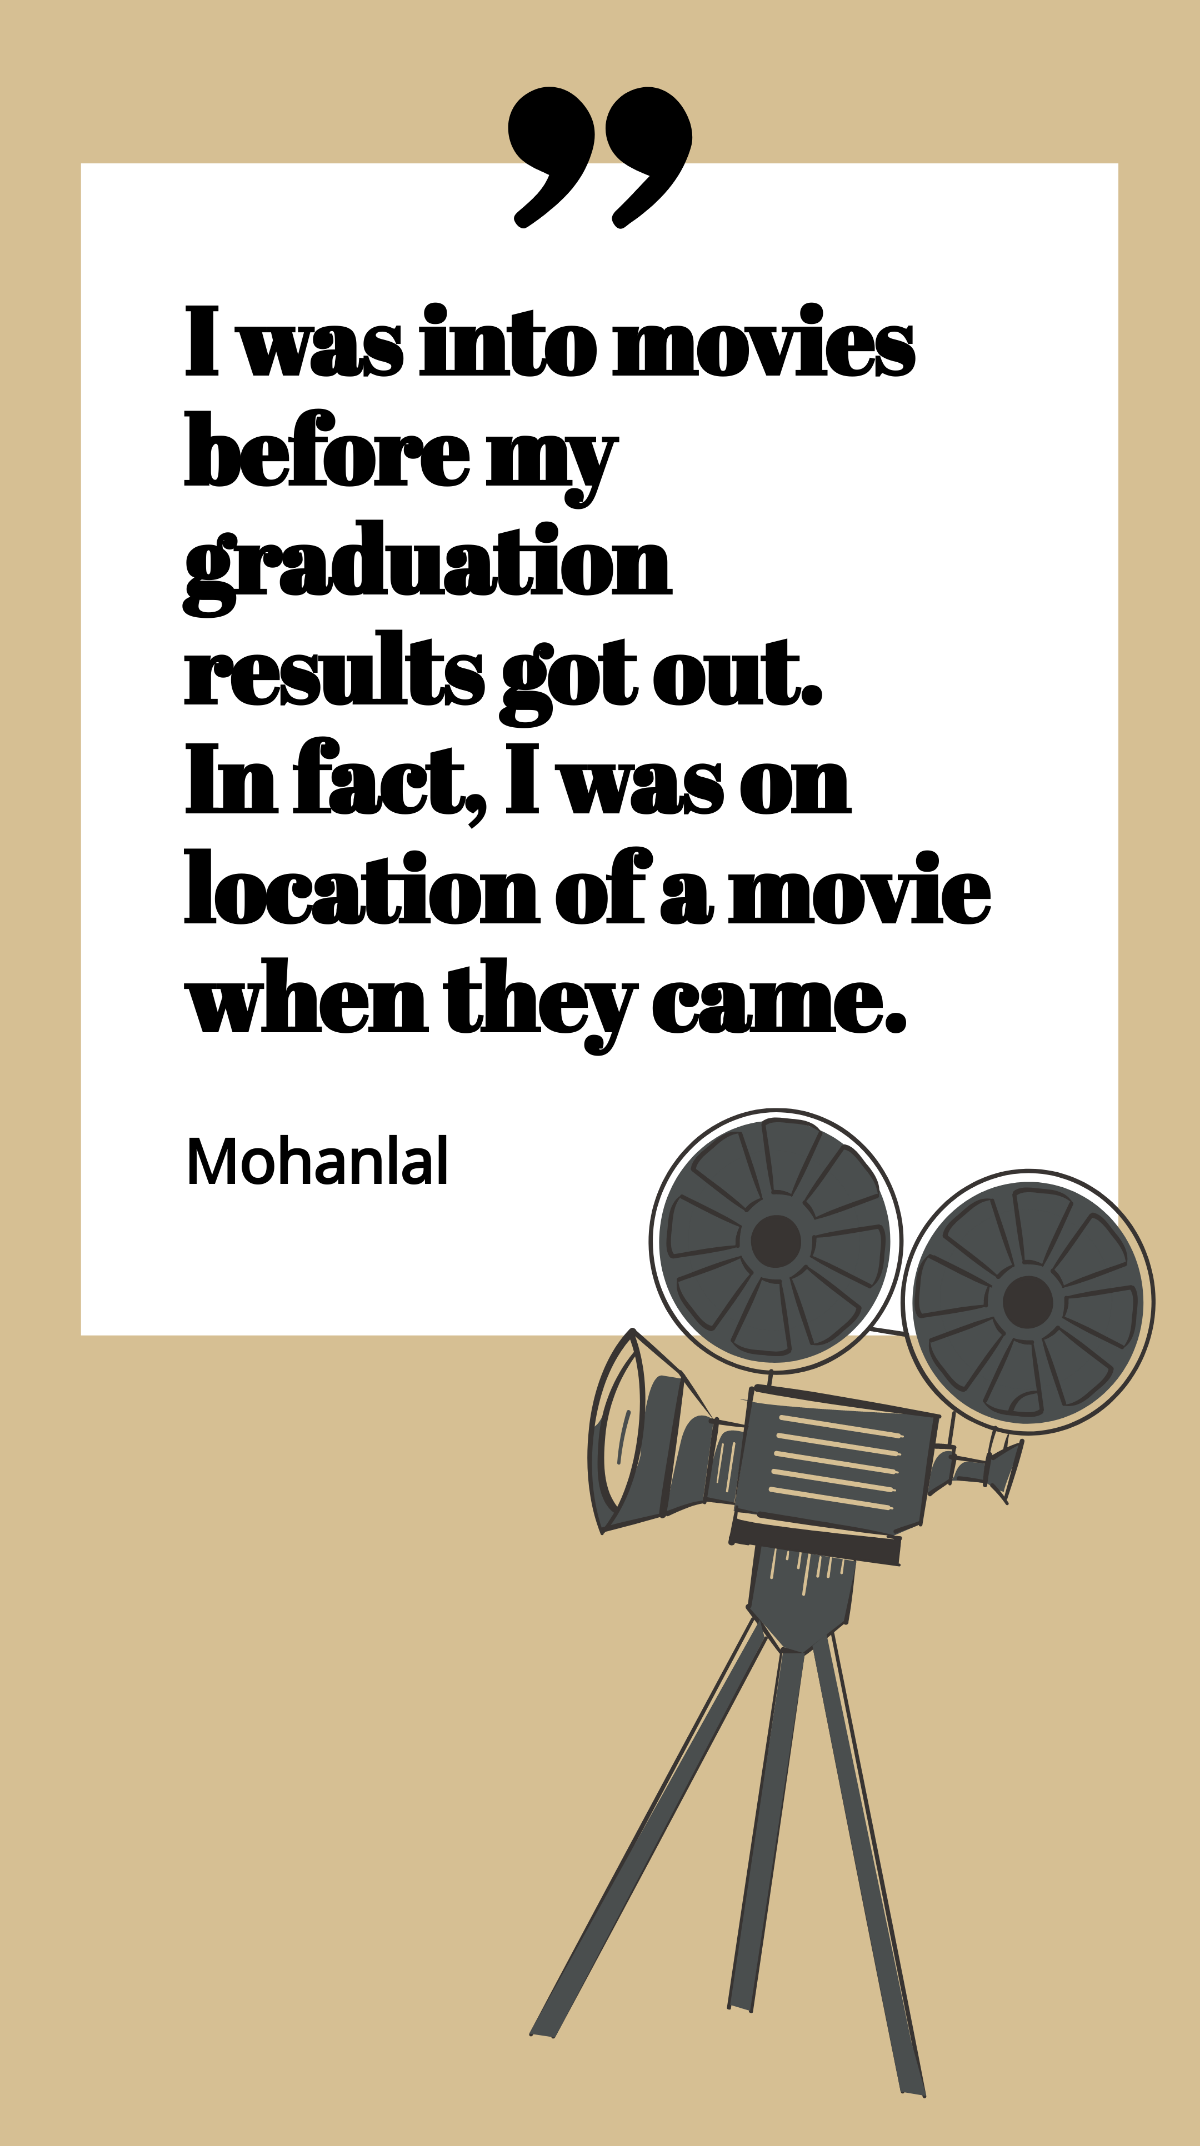 Mohanlal - I was into movies before my graduation results got out. In fact, I was on location of a movie when they came.